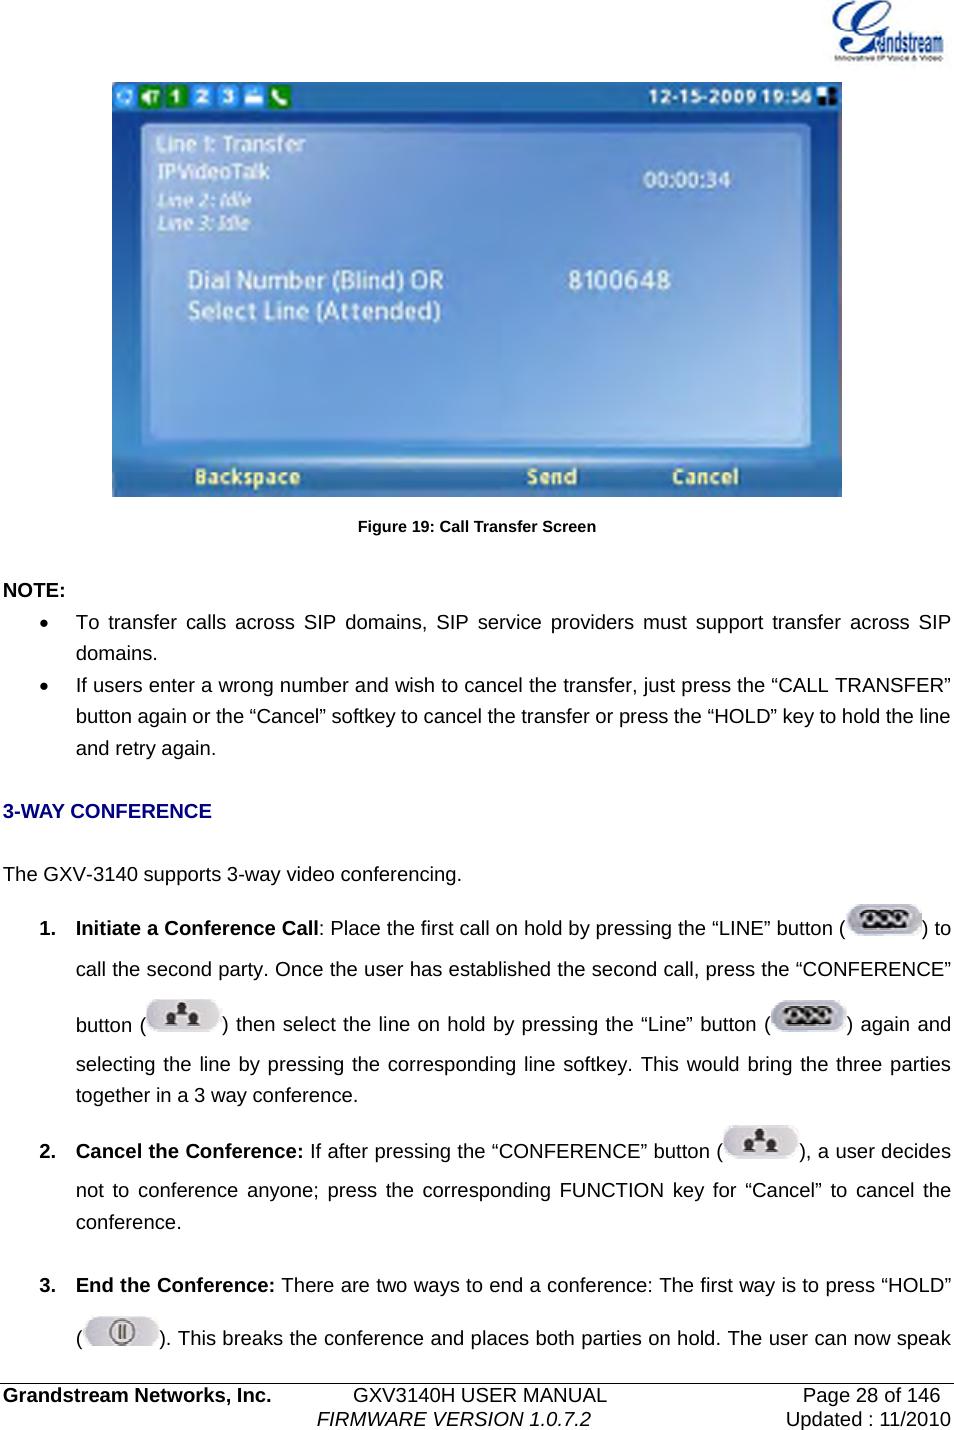   Grandstream Networks, Inc.        GXV3140H USER MANUAL                  Page 28 of 146                                FIRMWARE VERSION 1.0.7.2 Updated : 11/2010   Figure 19: Call Transfer Screen  NOTE: •  To transfer calls across SIP domains, SIP service providers must support transfer across SIP domains.  •  If users enter a wrong number and wish to cancel the transfer, just press the “CALL TRANSFER” button again or the “Cancel” softkey to cancel the transfer or press the “HOLD” key to hold the line and retry again.  3-WAY CONFERENCE  The GXV-3140 supports 3-way video conferencing. 1.  Initiate a Conference Call: Place the first call on hold by pressing the “LINE” button ( ) to call the second party. Once the user has established the second call, press the “CONFERENCE” button ( ) then select the line on hold by pressing the “Line” button ( ) again and selecting the line by pressing the corresponding line softkey. This would bring the three parties together in a 3 way conference.   2.  Cancel the Conference: If after pressing the “CONFERENCE” button ( ), a user decides not to conference anyone; press the corresponding FUNCTION key for “Cancel” to cancel the conference.   3.  End the Conference: There are two ways to end a conference: The first way is to press “HOLD” (). This breaks the conference and places both parties on hold. The user can now speak 